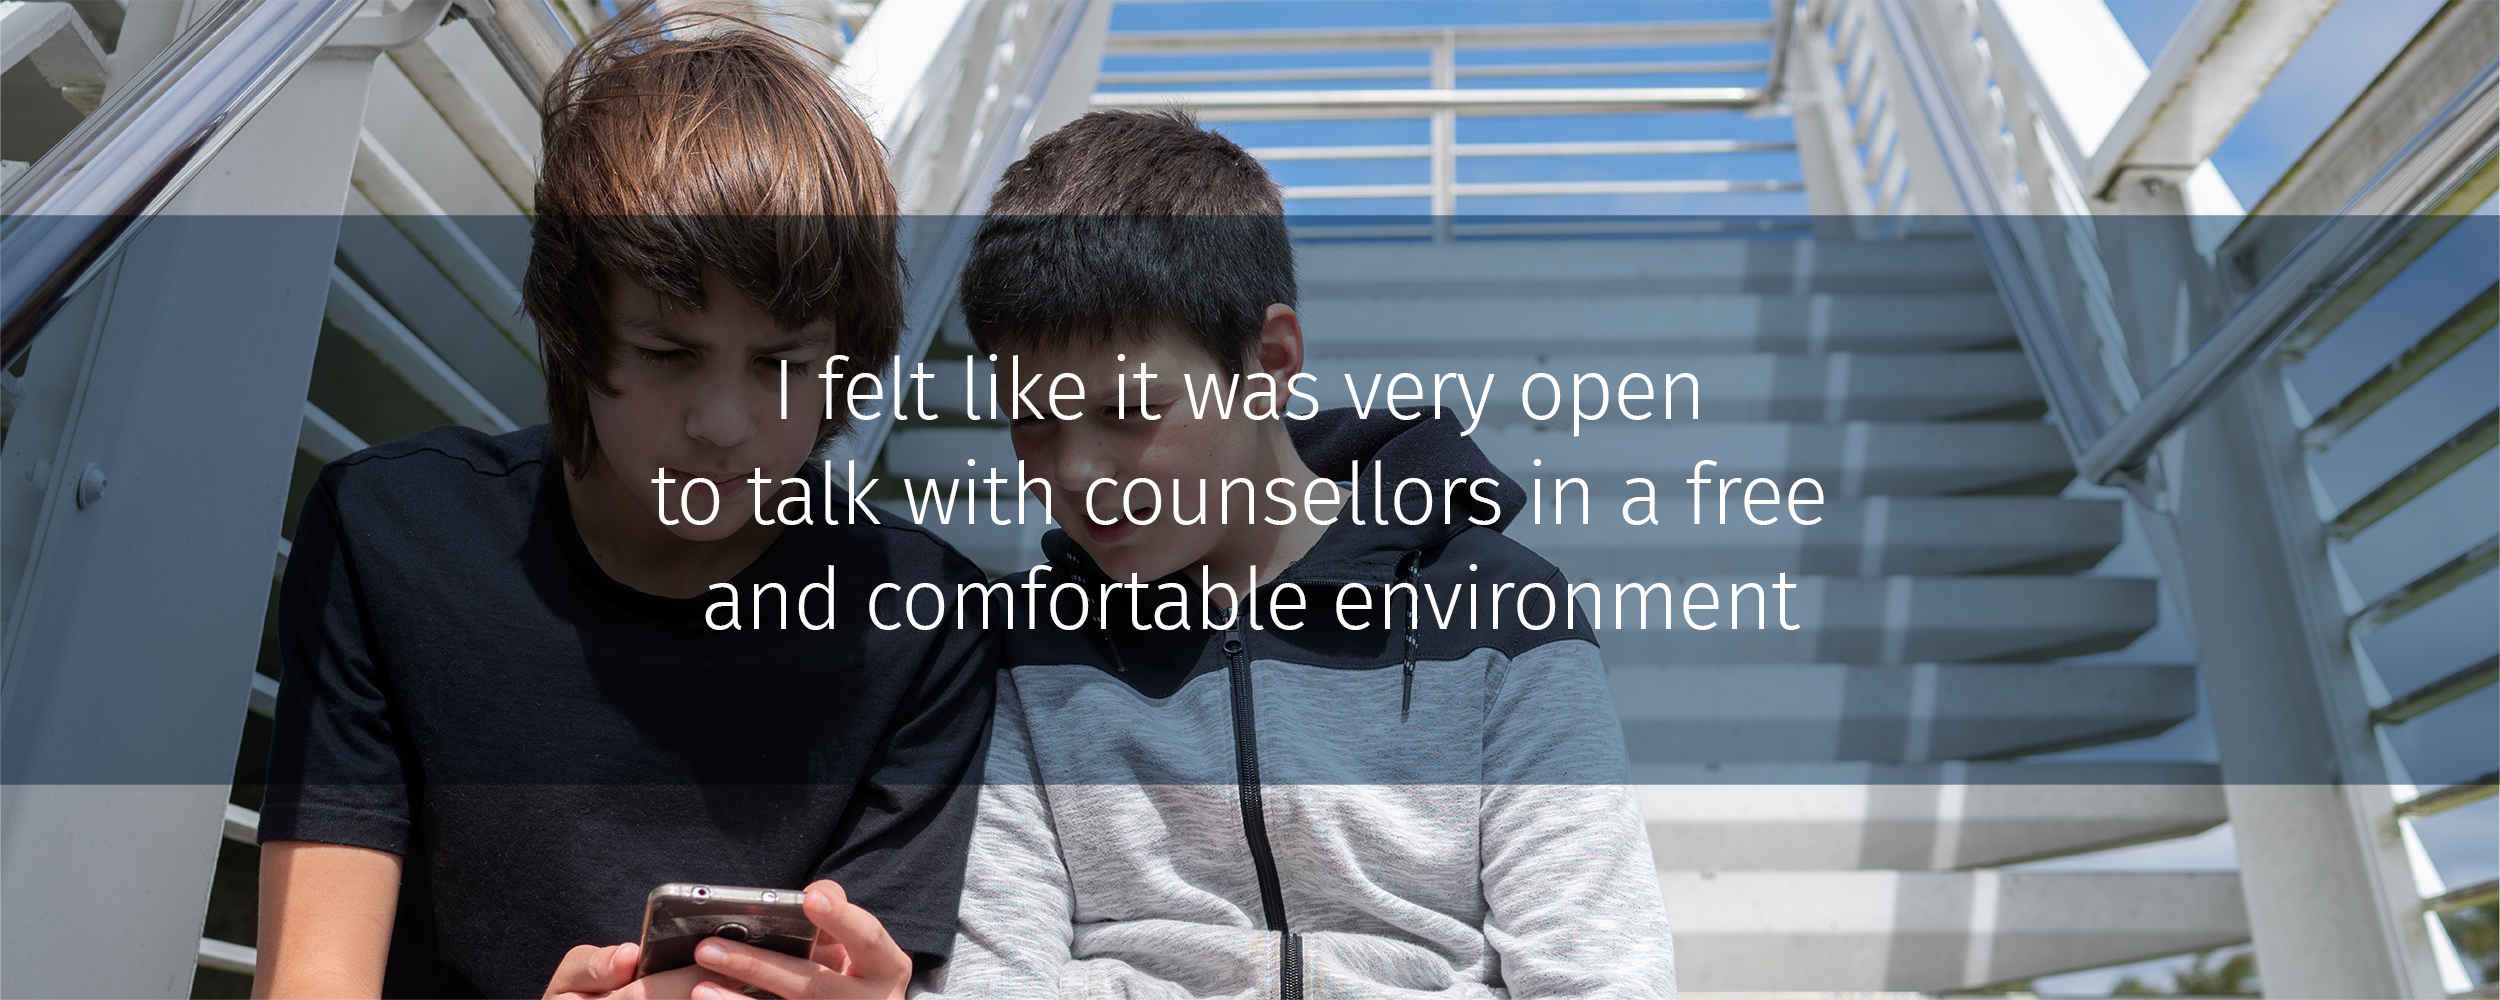 It felt like it's open to talk with counsellors in a free and comfortable envriontment